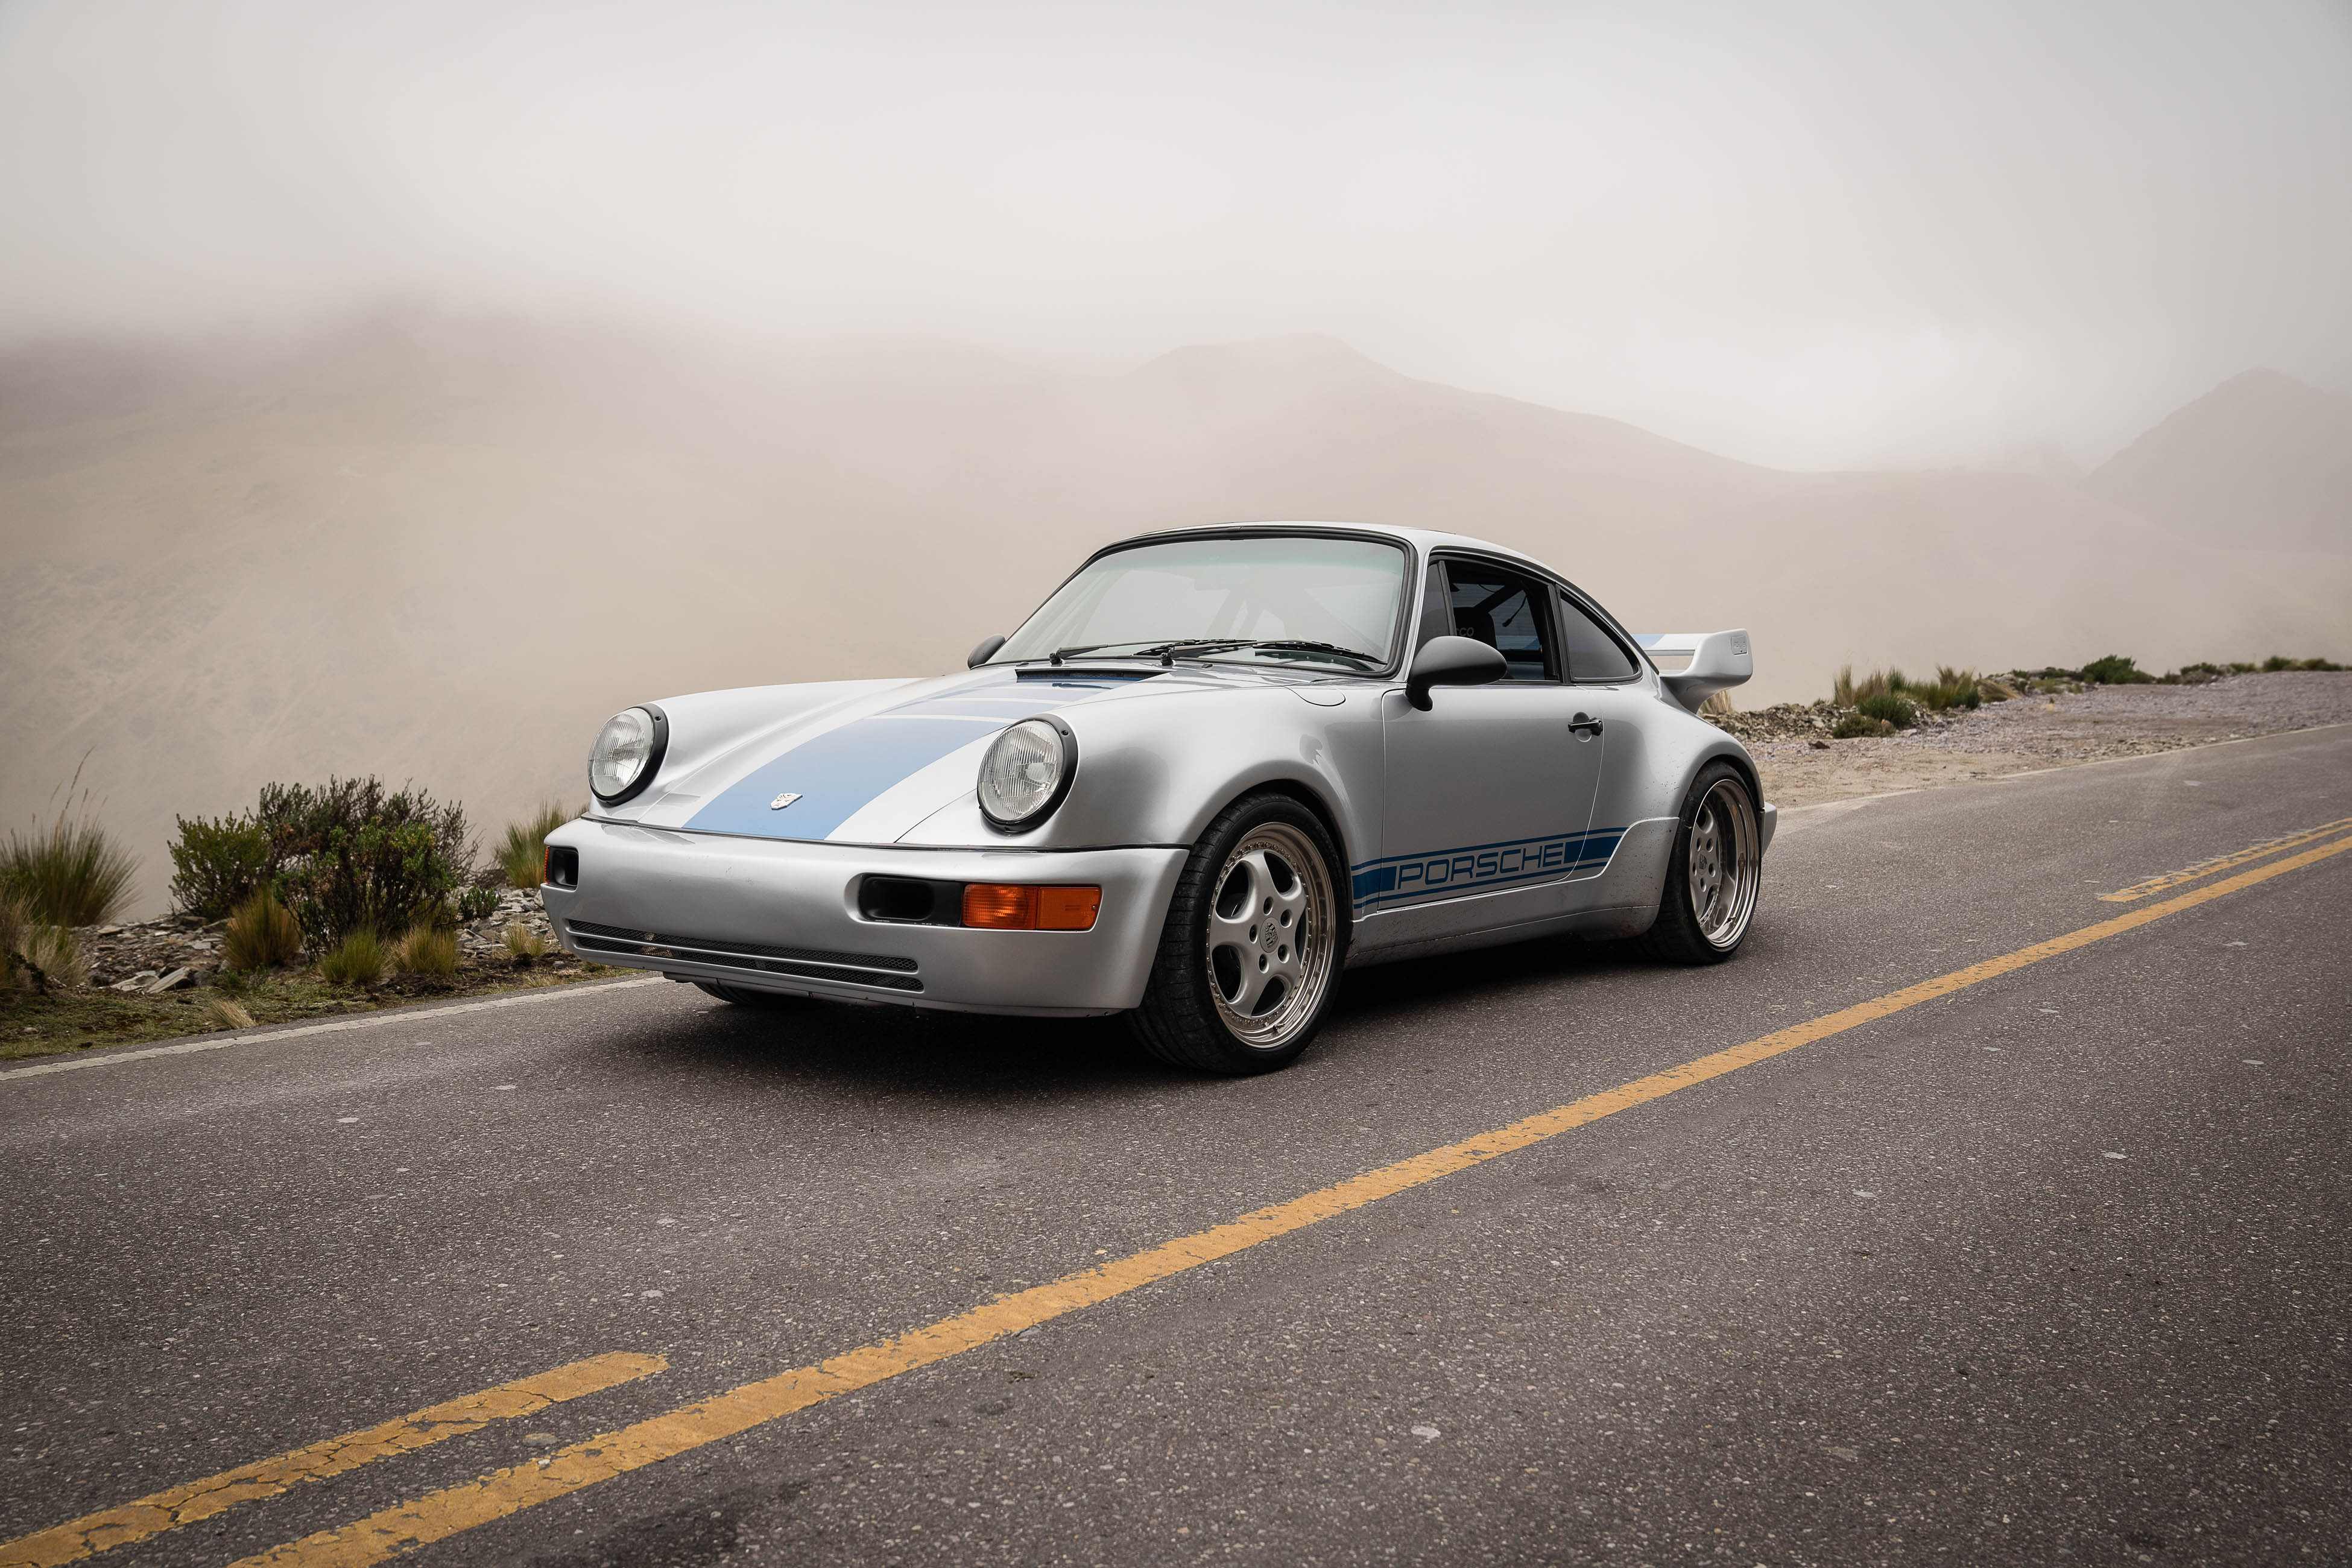 Silver Porsche 911 Carrera RS 3.8 driving on open road